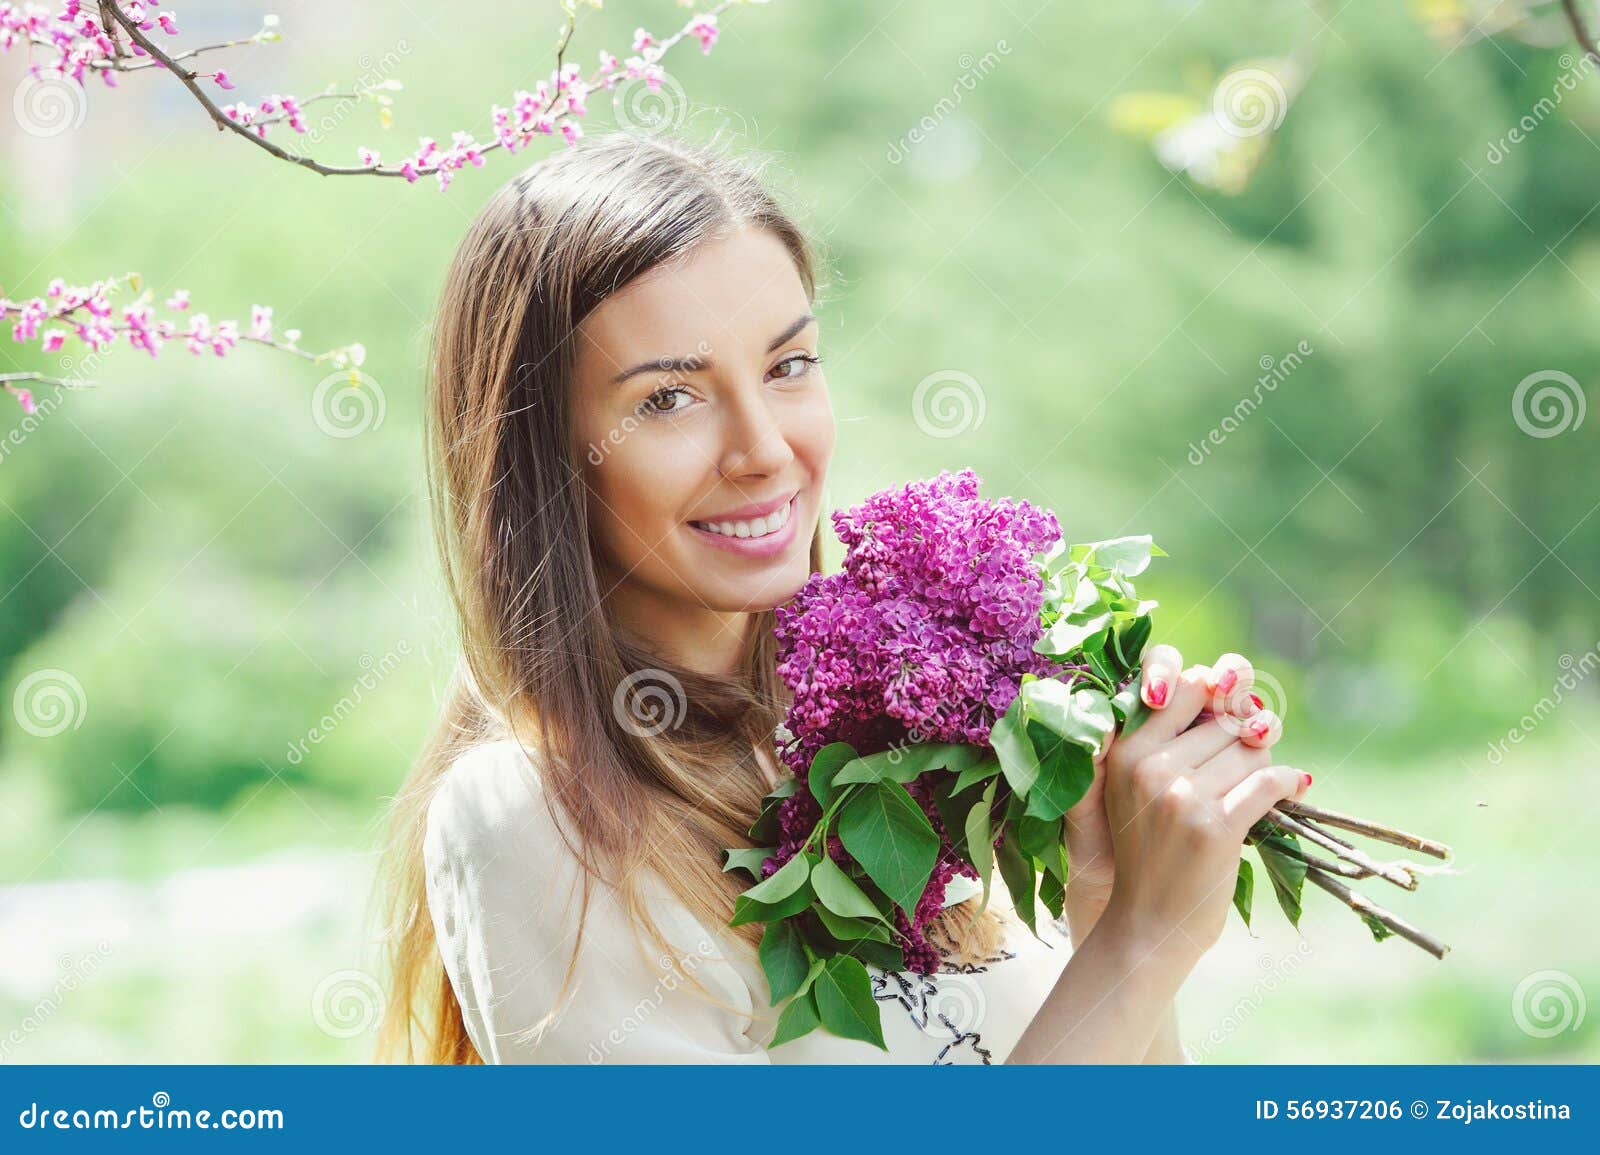 Beautiful Young Woman in Spring Garden Stock Photo - Image of bunch ...